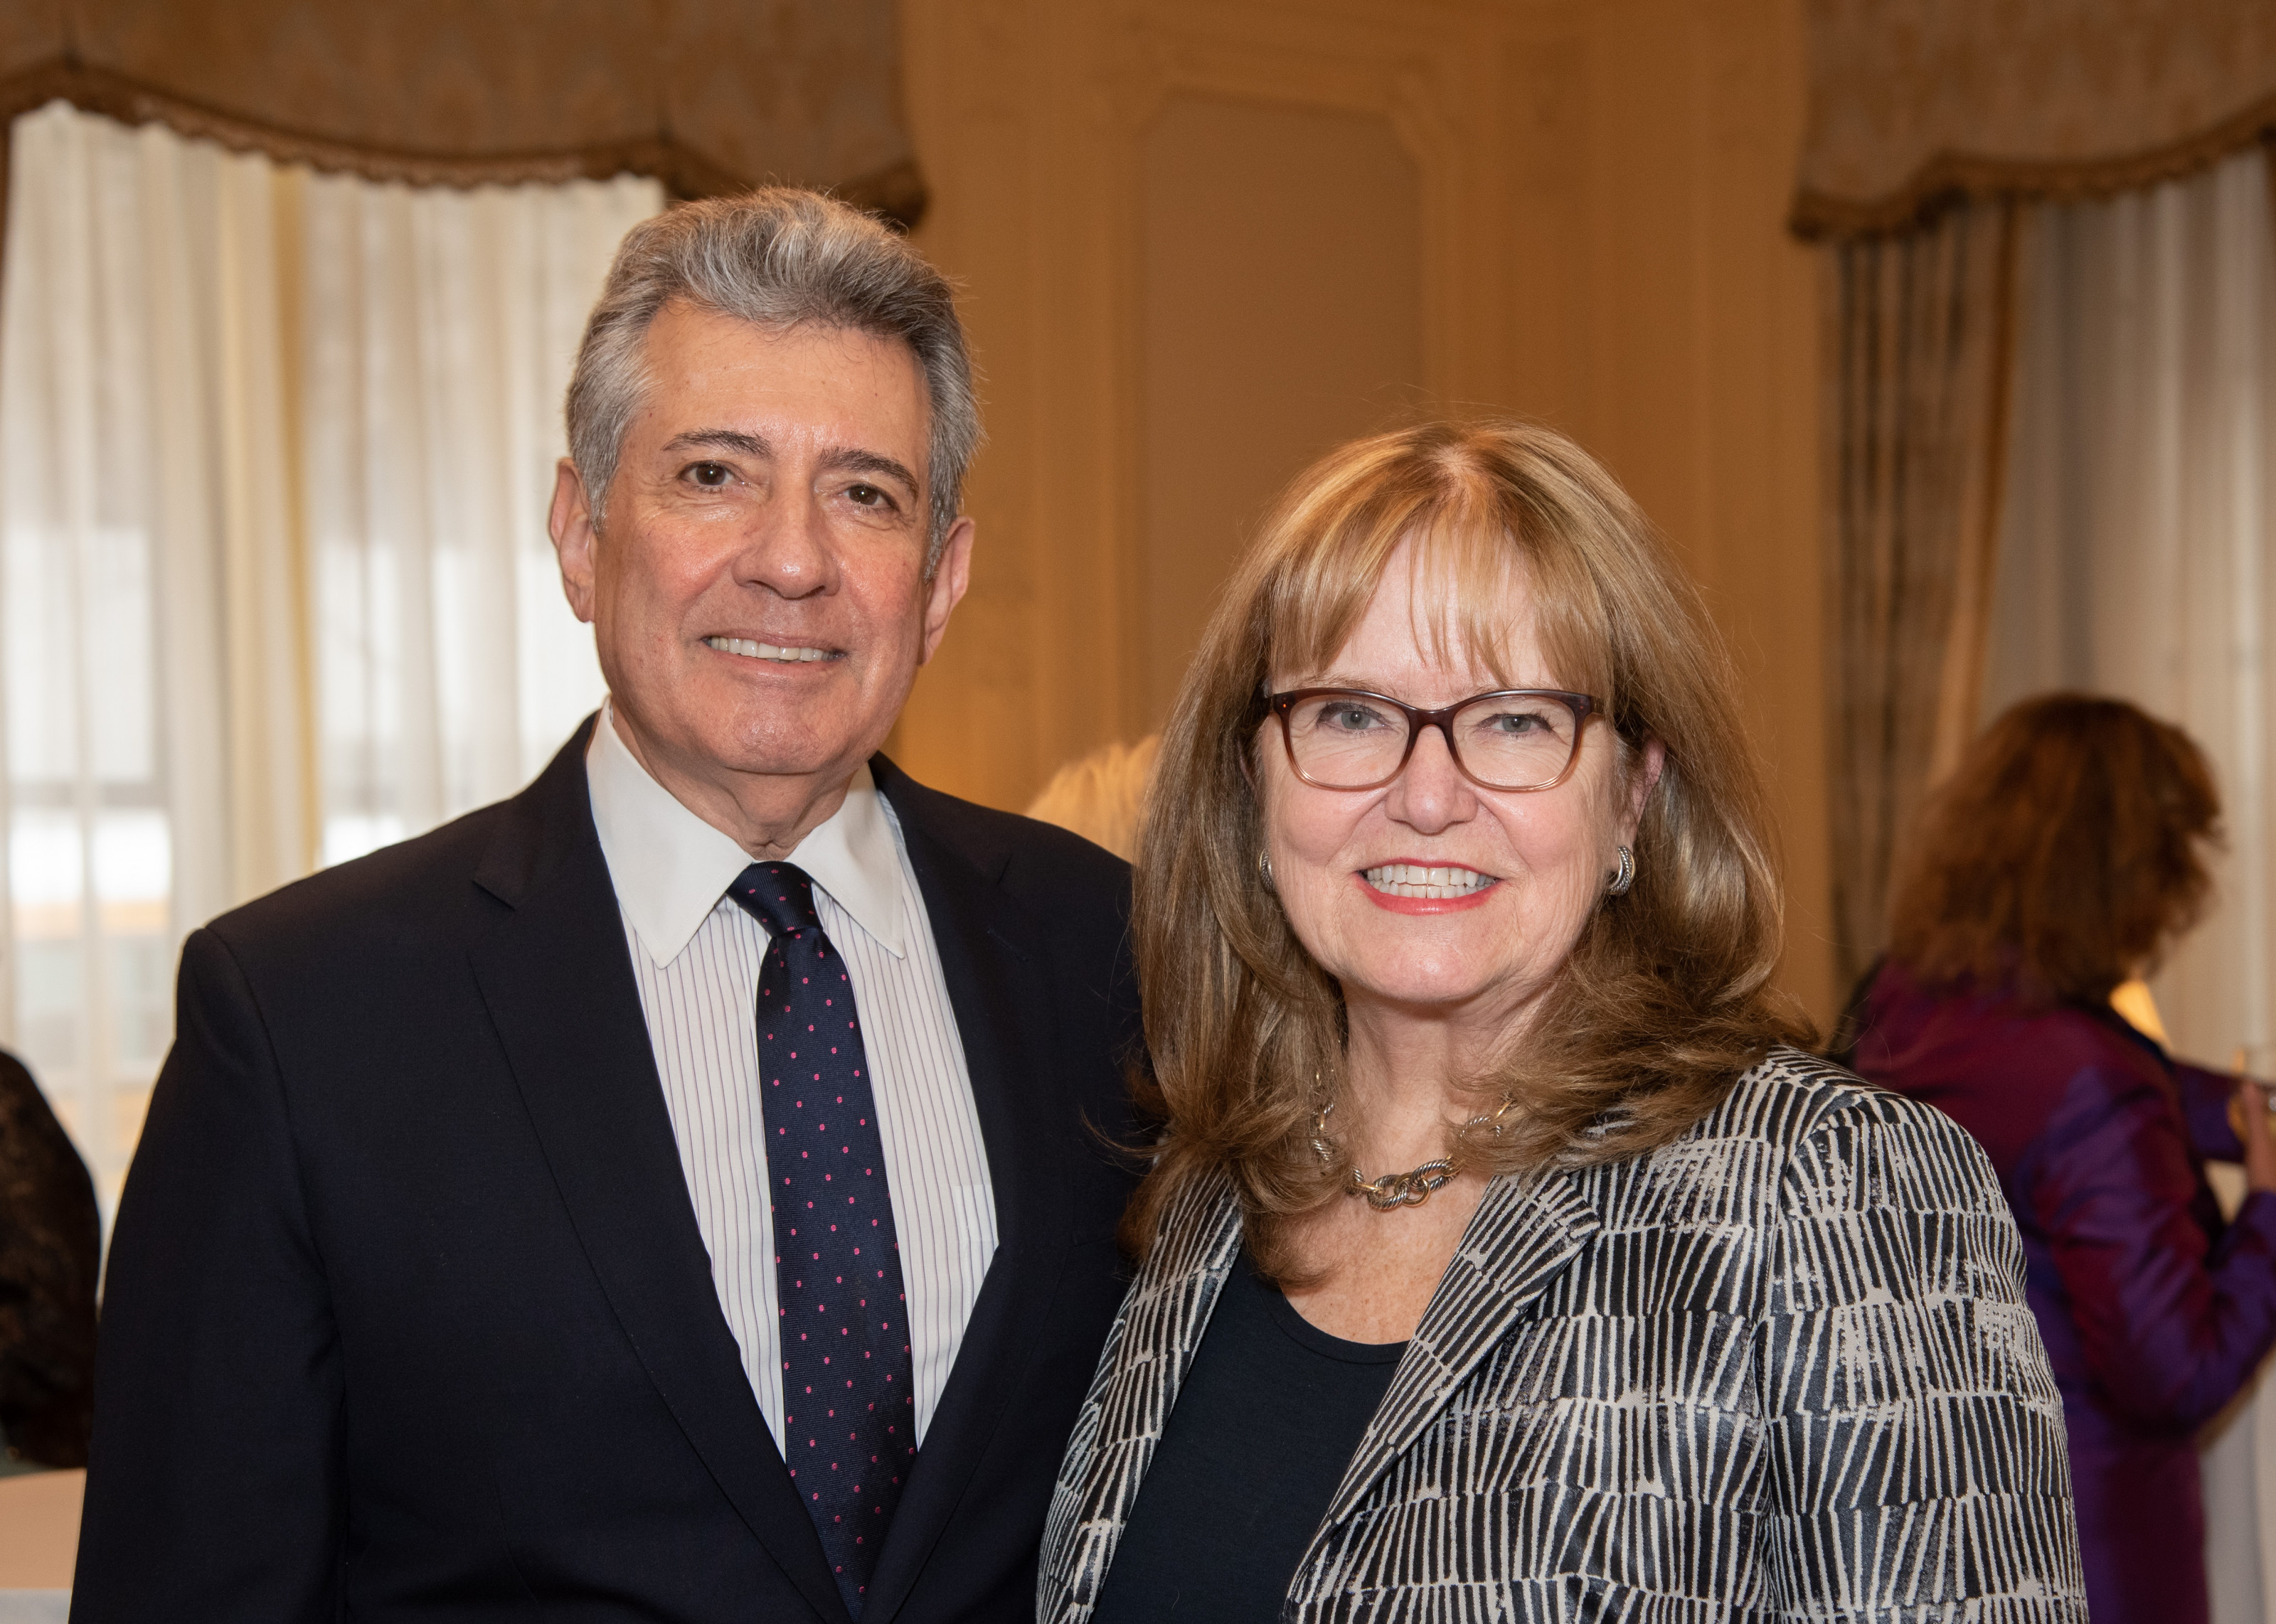 Chair of the Board Mike Materasso with Board Member Barbara Loughlin '70